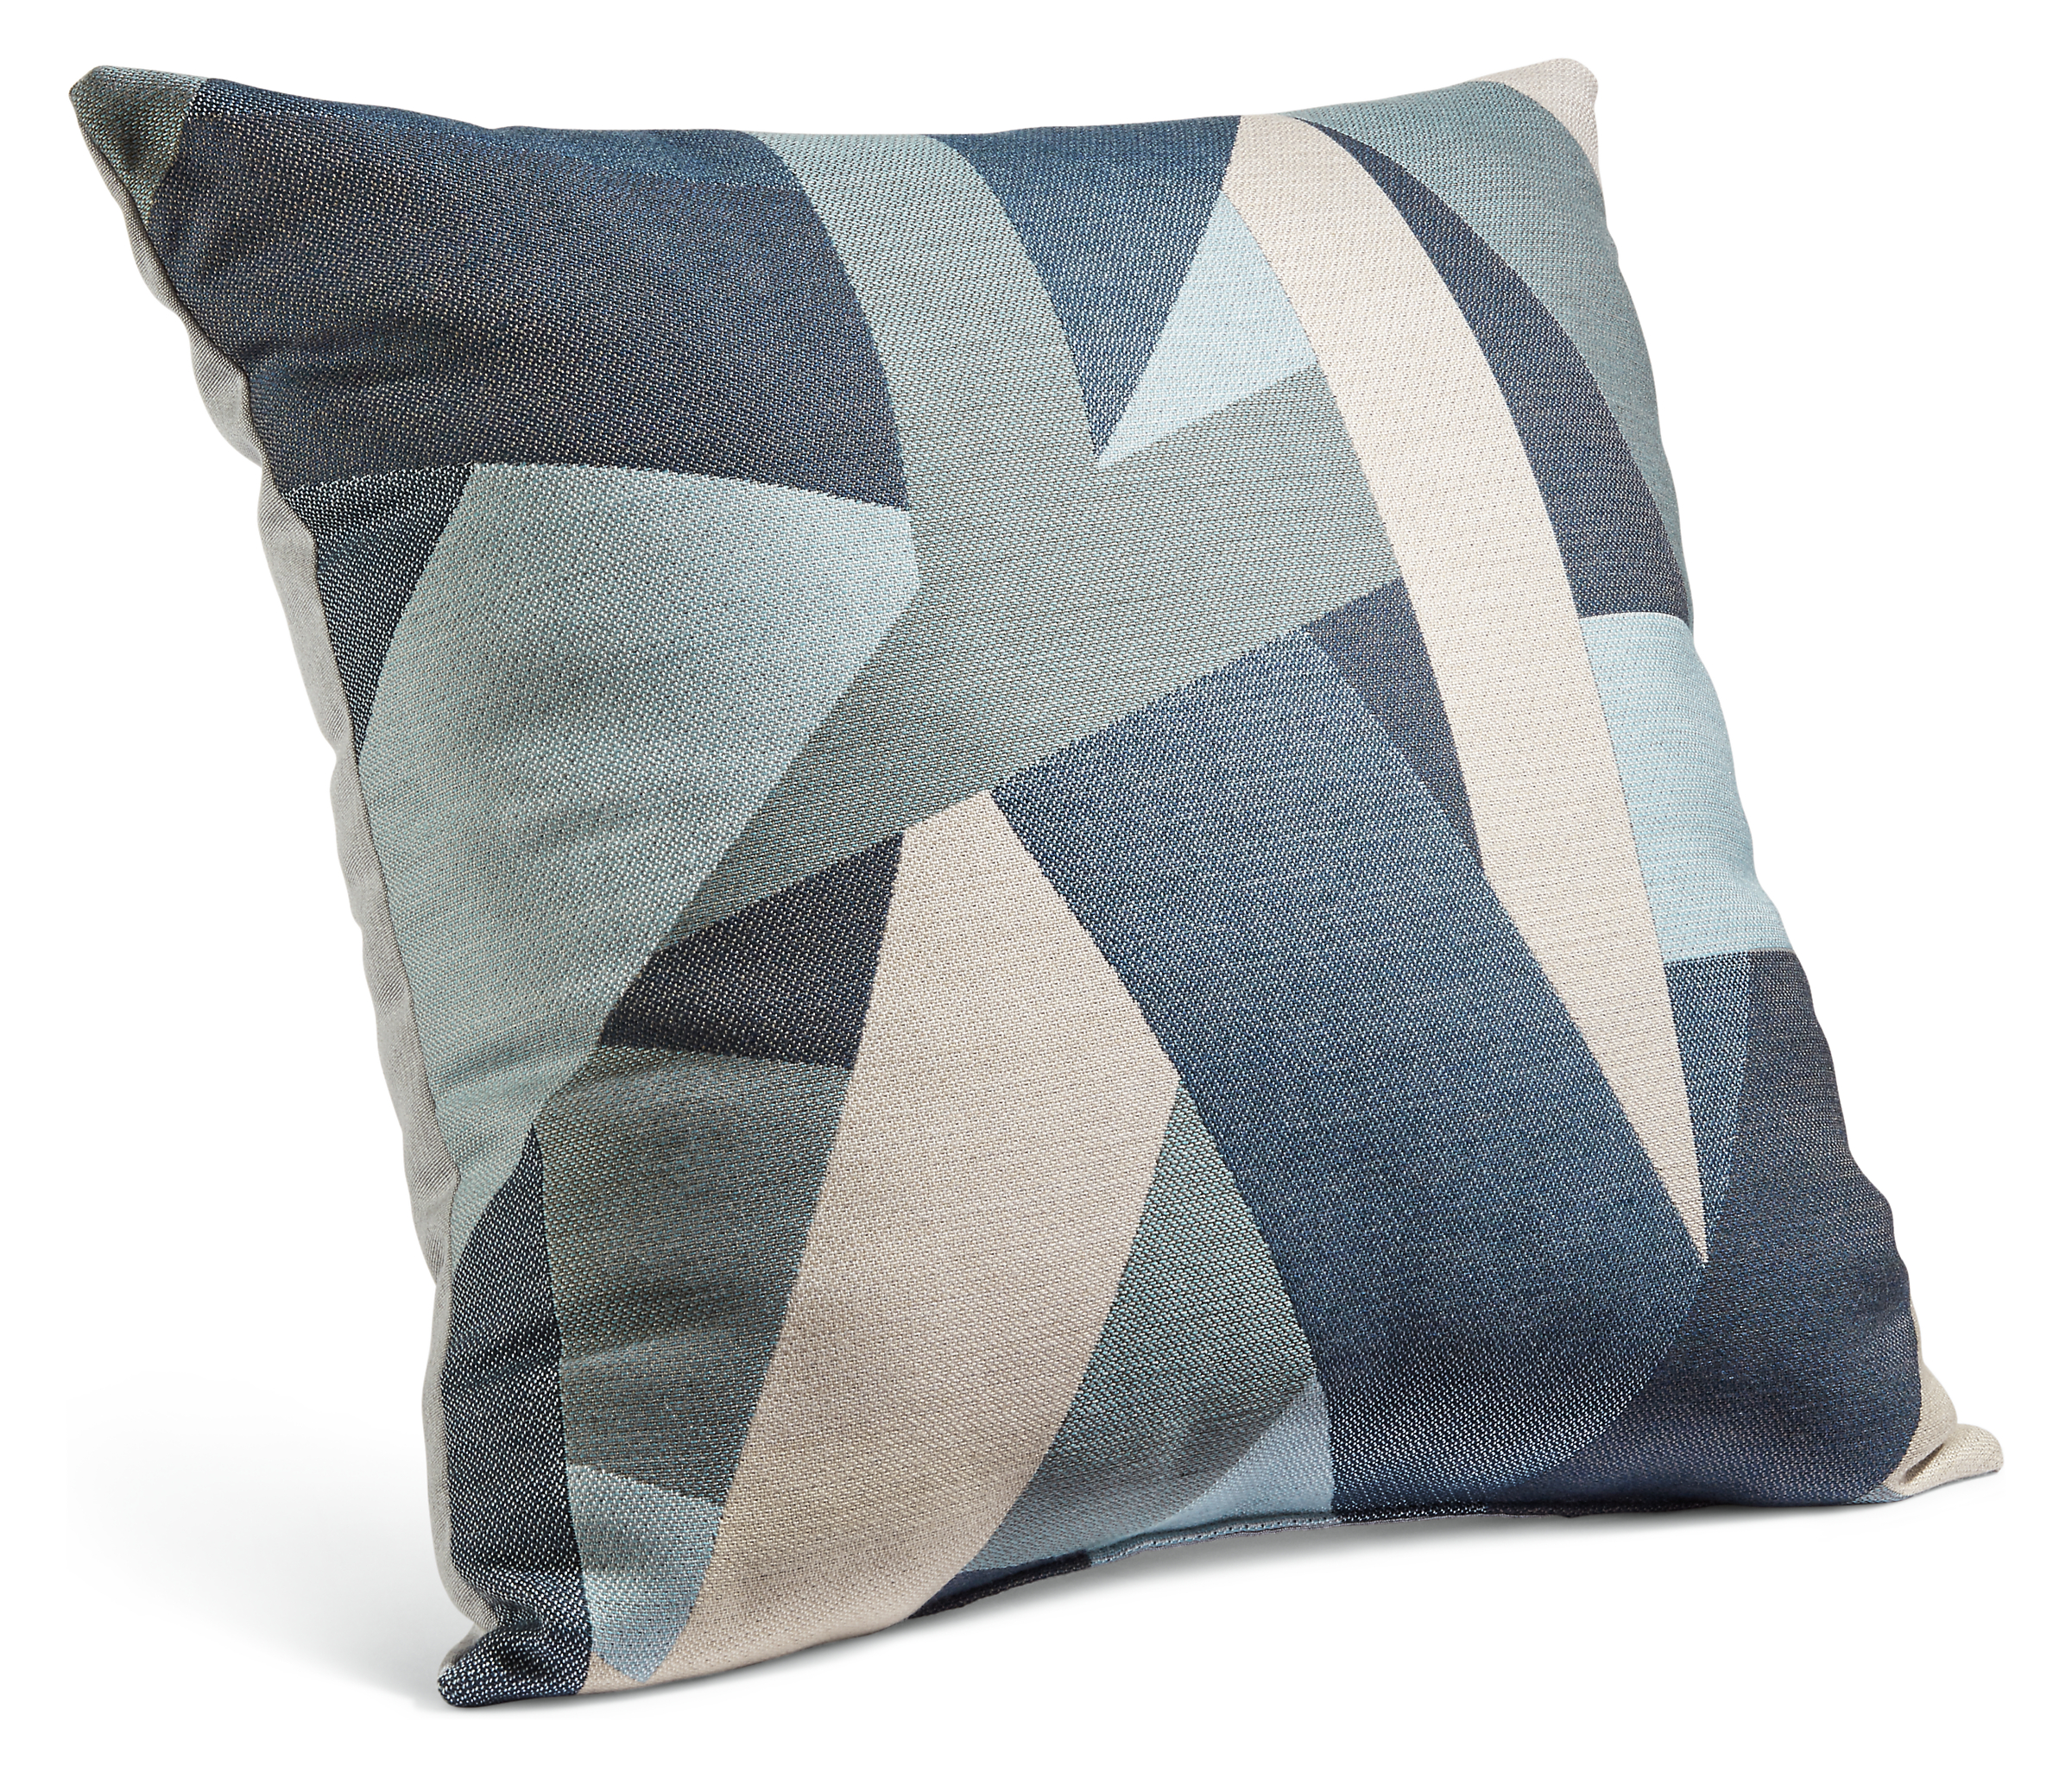 Refract 20w 20h Outdoor Pillow in Wye Blue/Cement